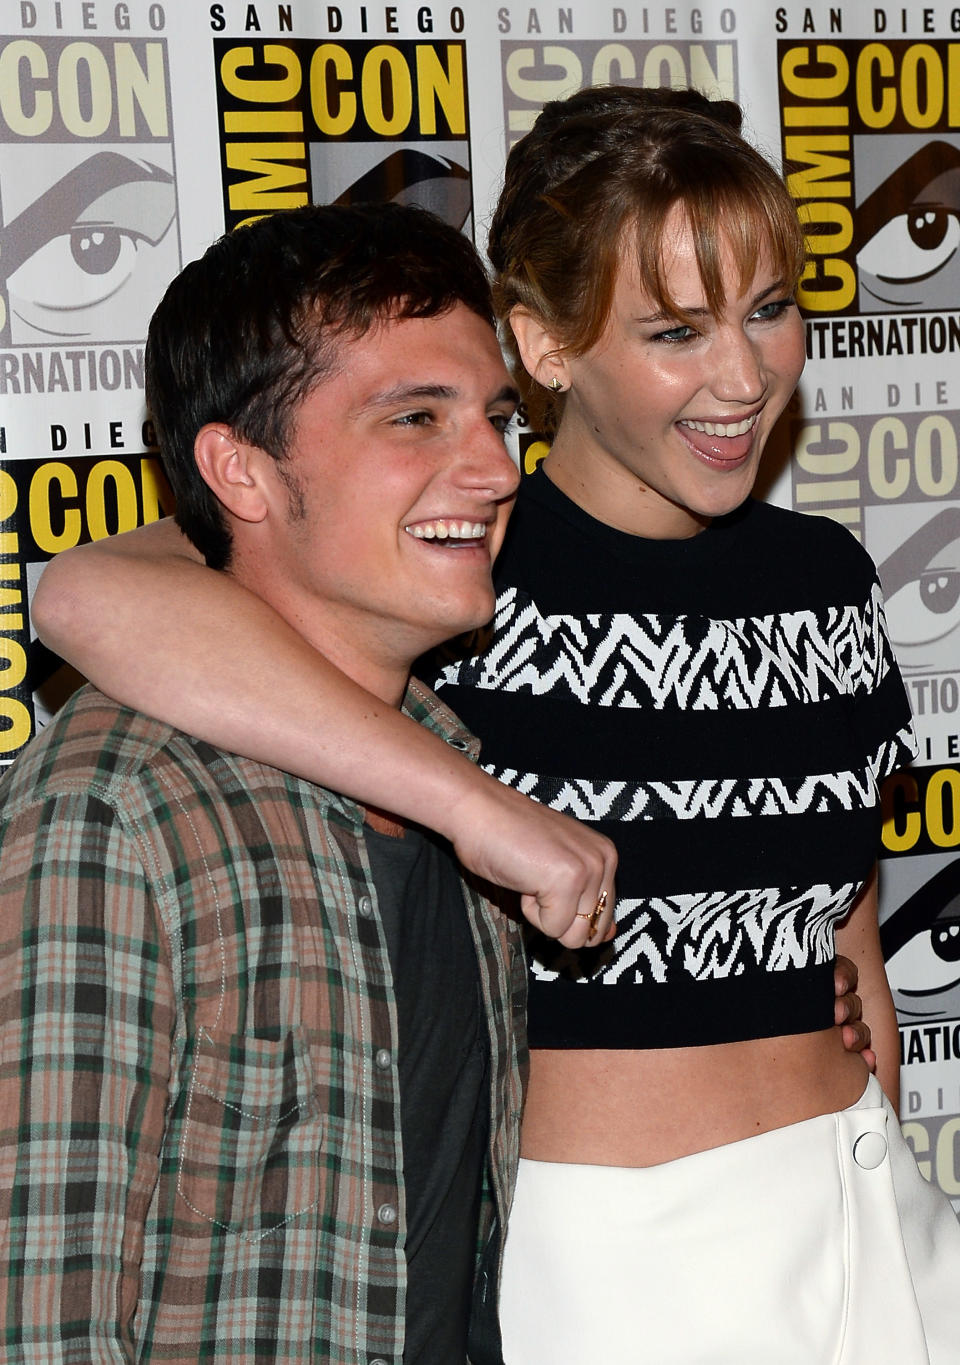 Jennifer smiles widely as she has her arm around Josh's shoulders on the red carpet